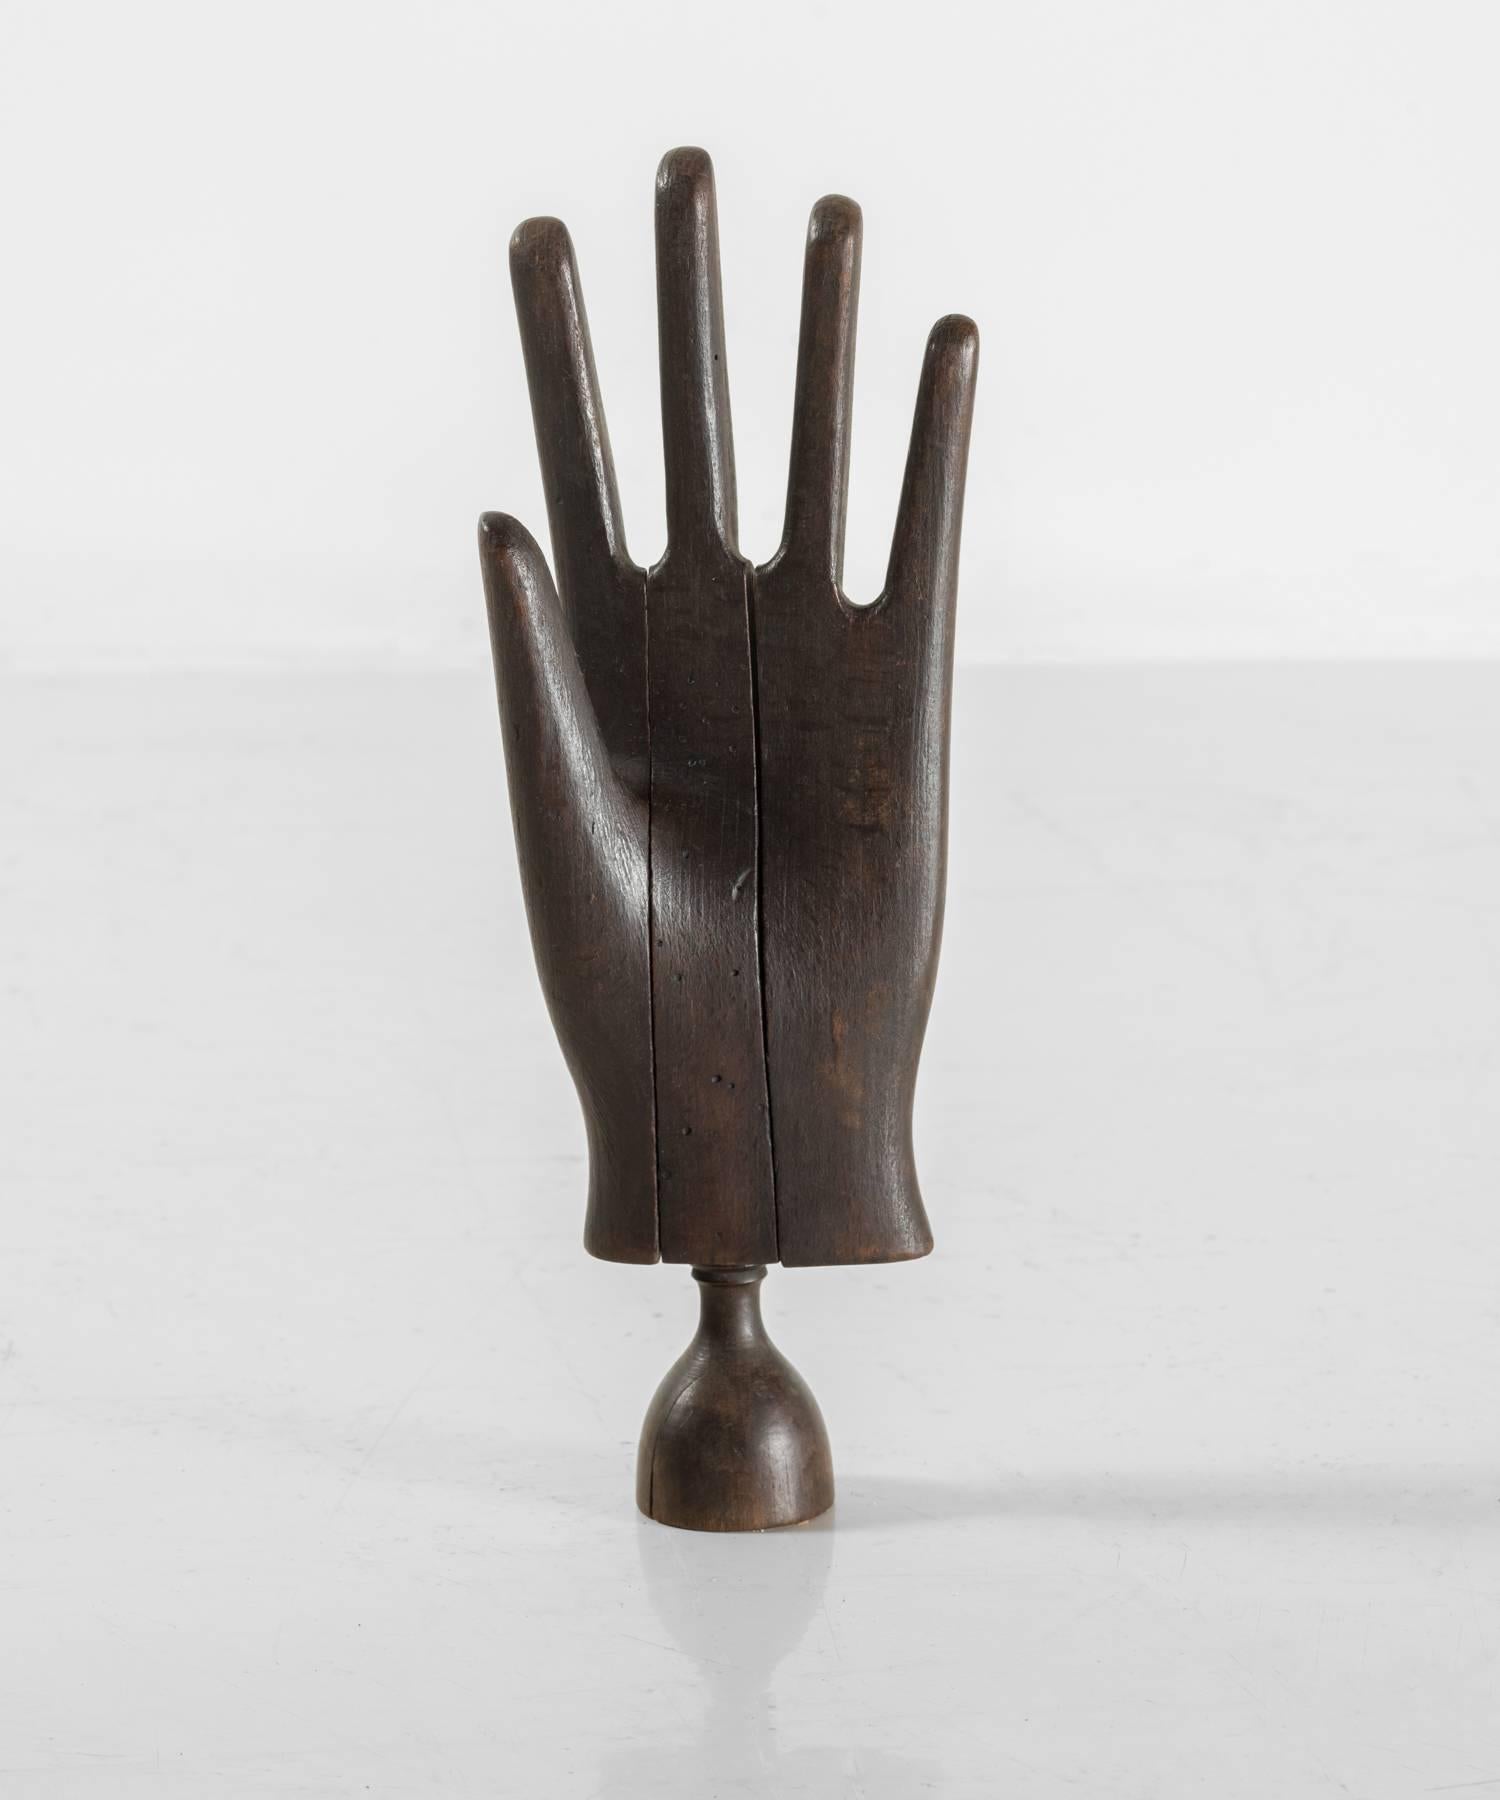 Wooden glove stretcher, circa 1890.

Haberdashery form, crafted to display and stretch leather gloves.